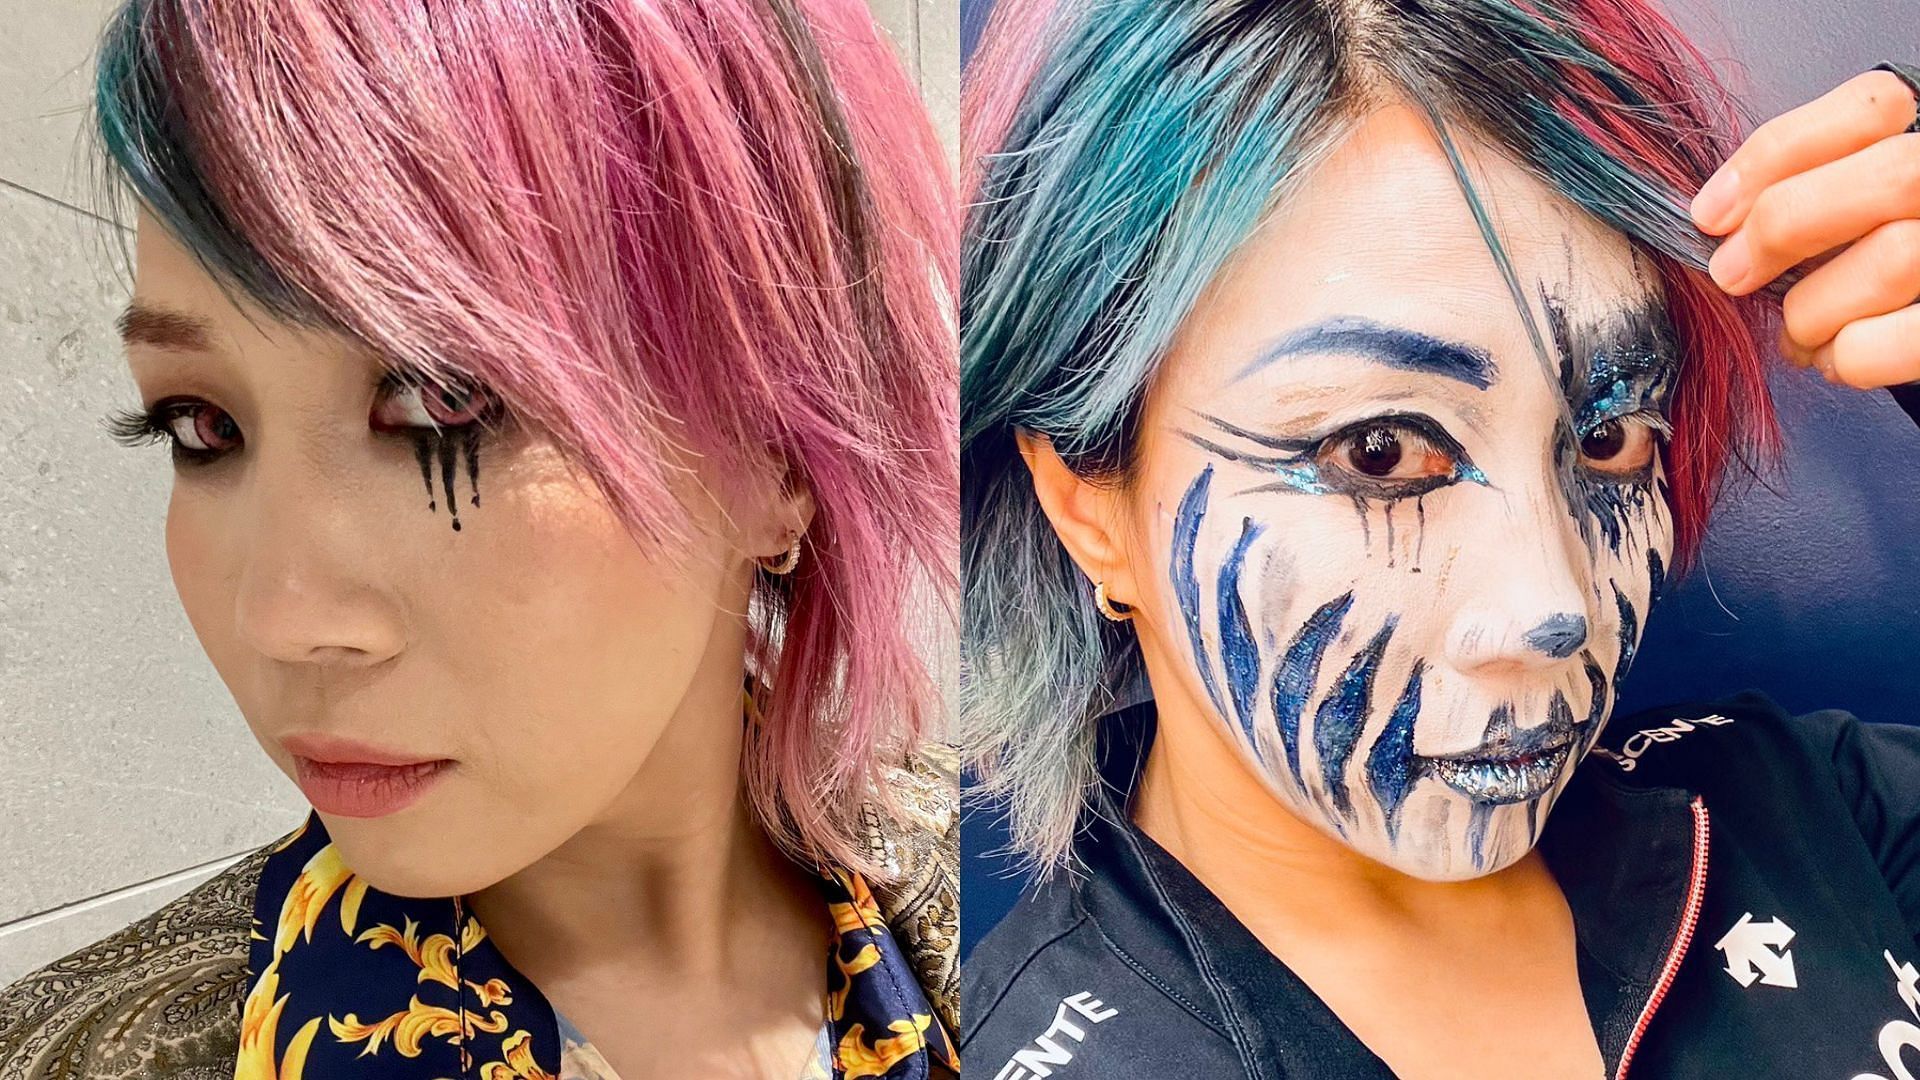 Asuka will challenge for the RAW Women